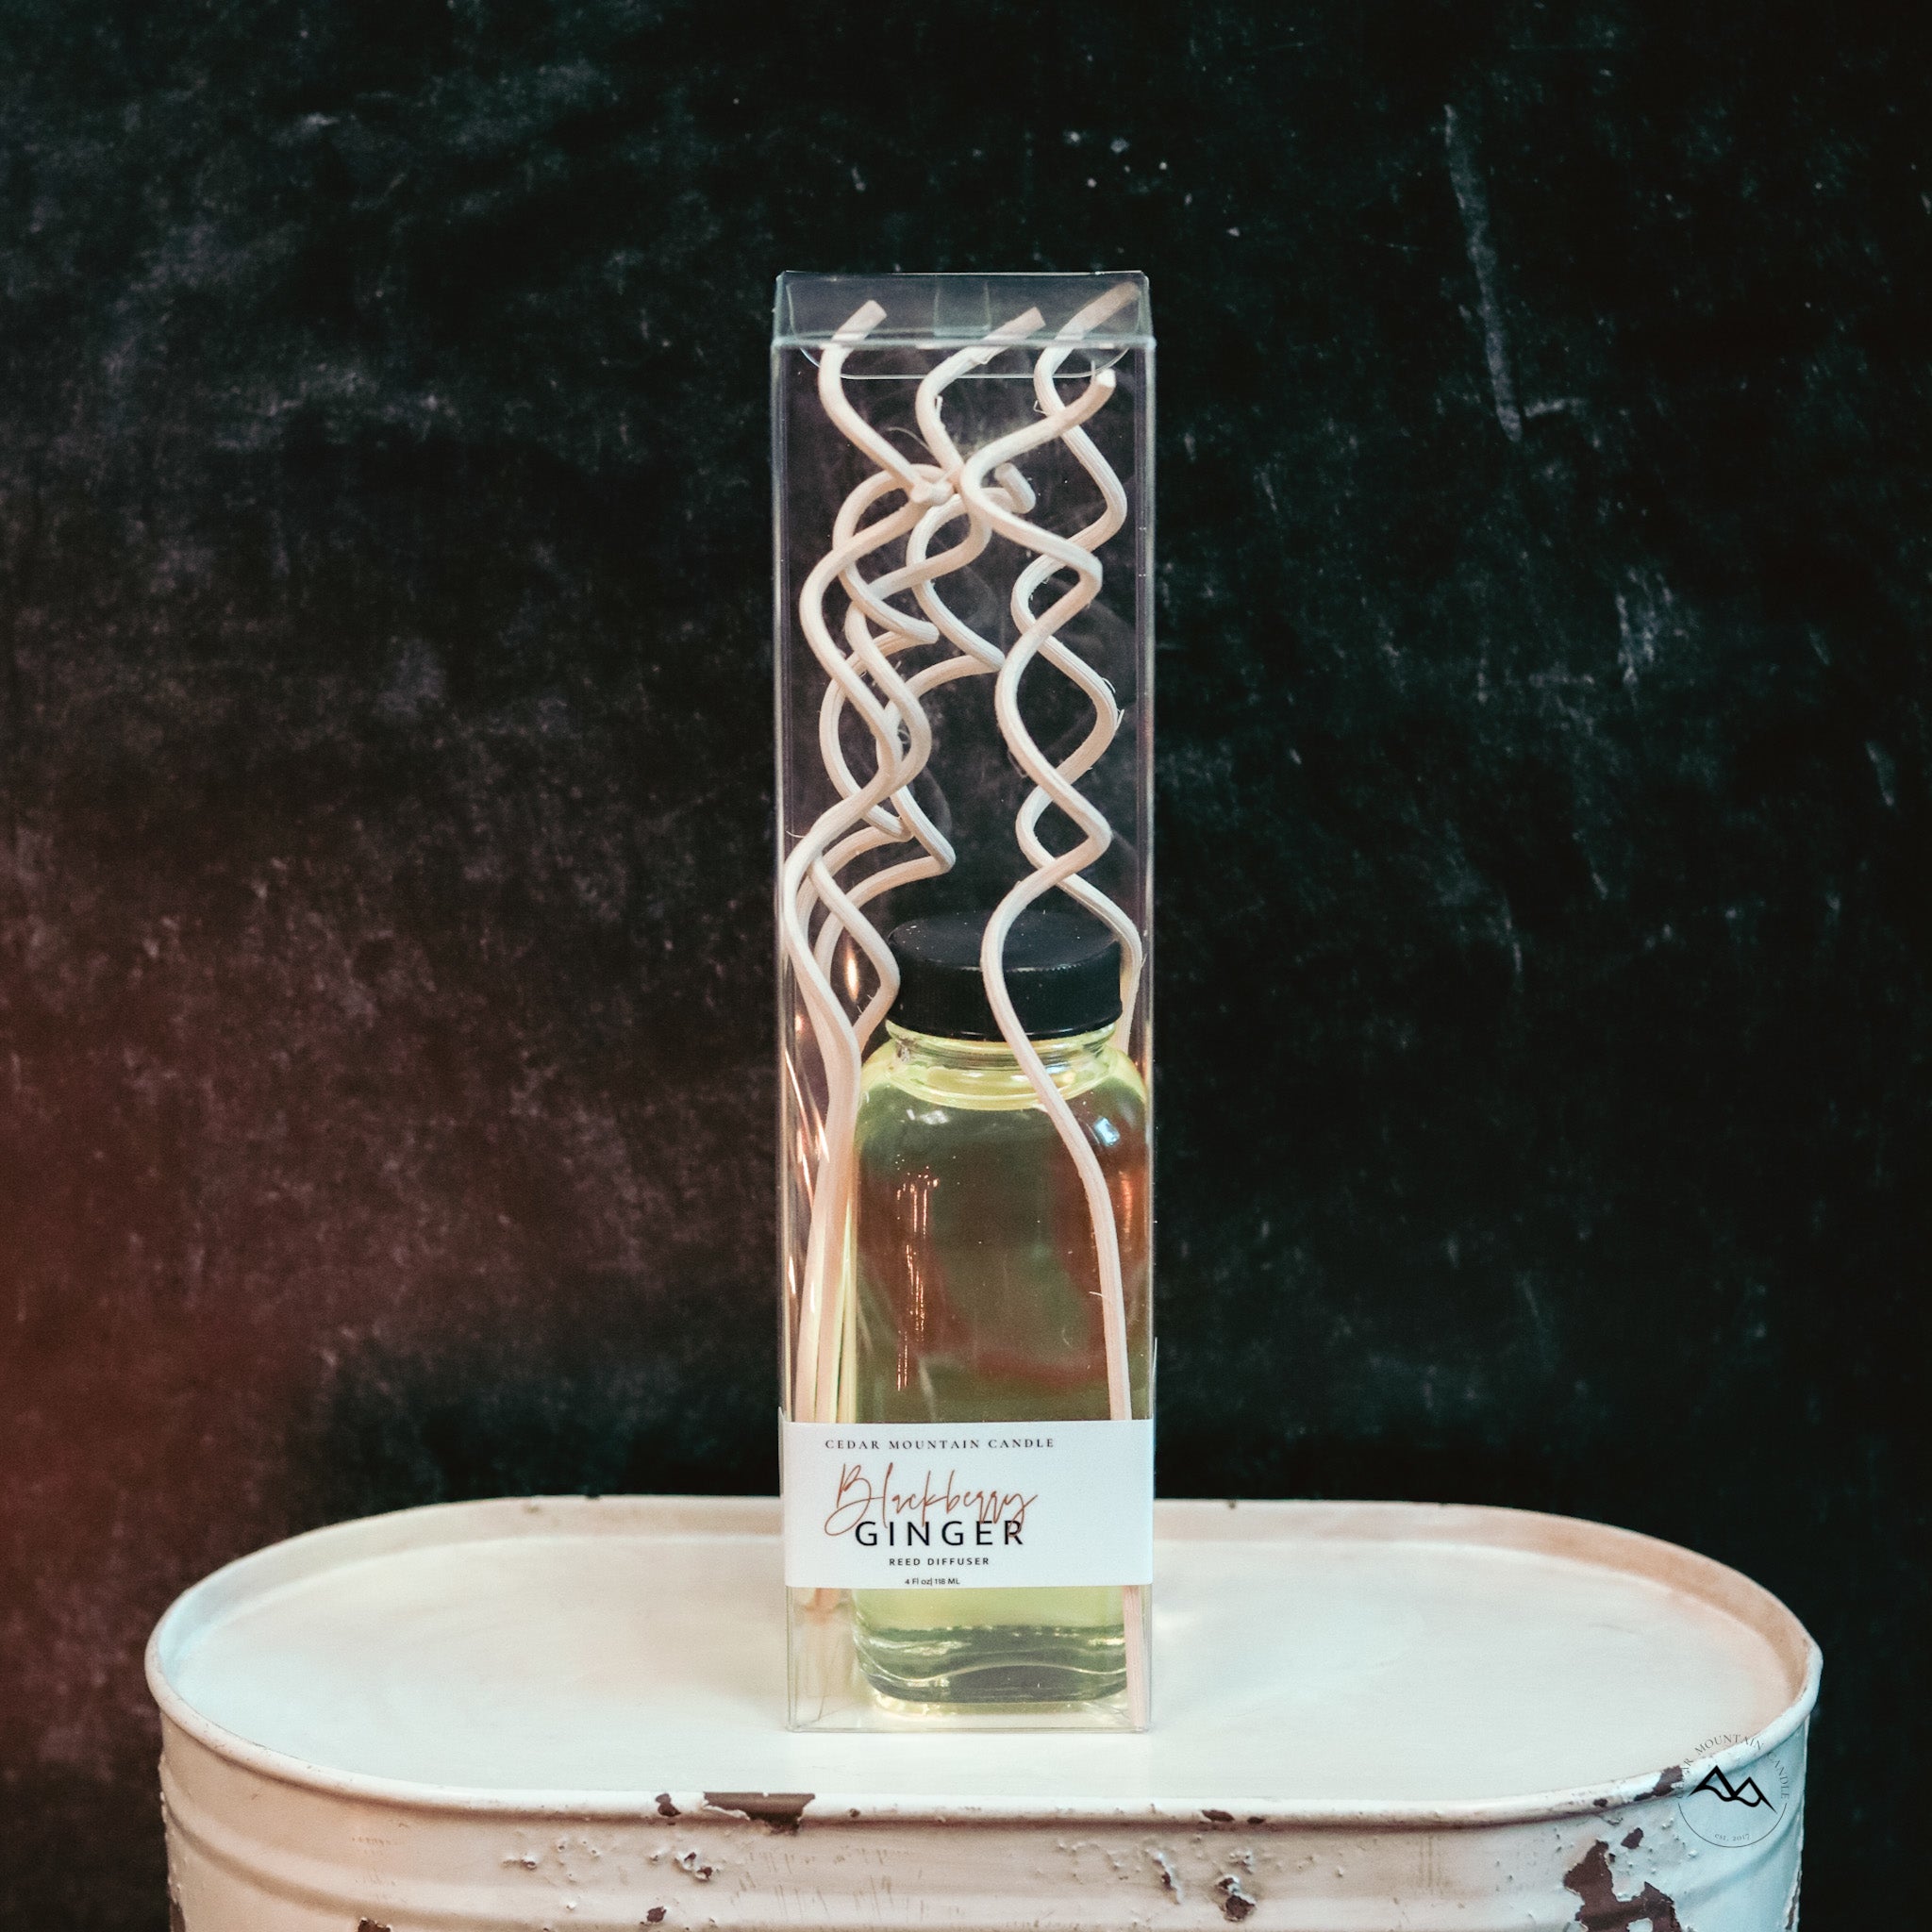 Spiral Reed Diffuser - Choose Your Scent